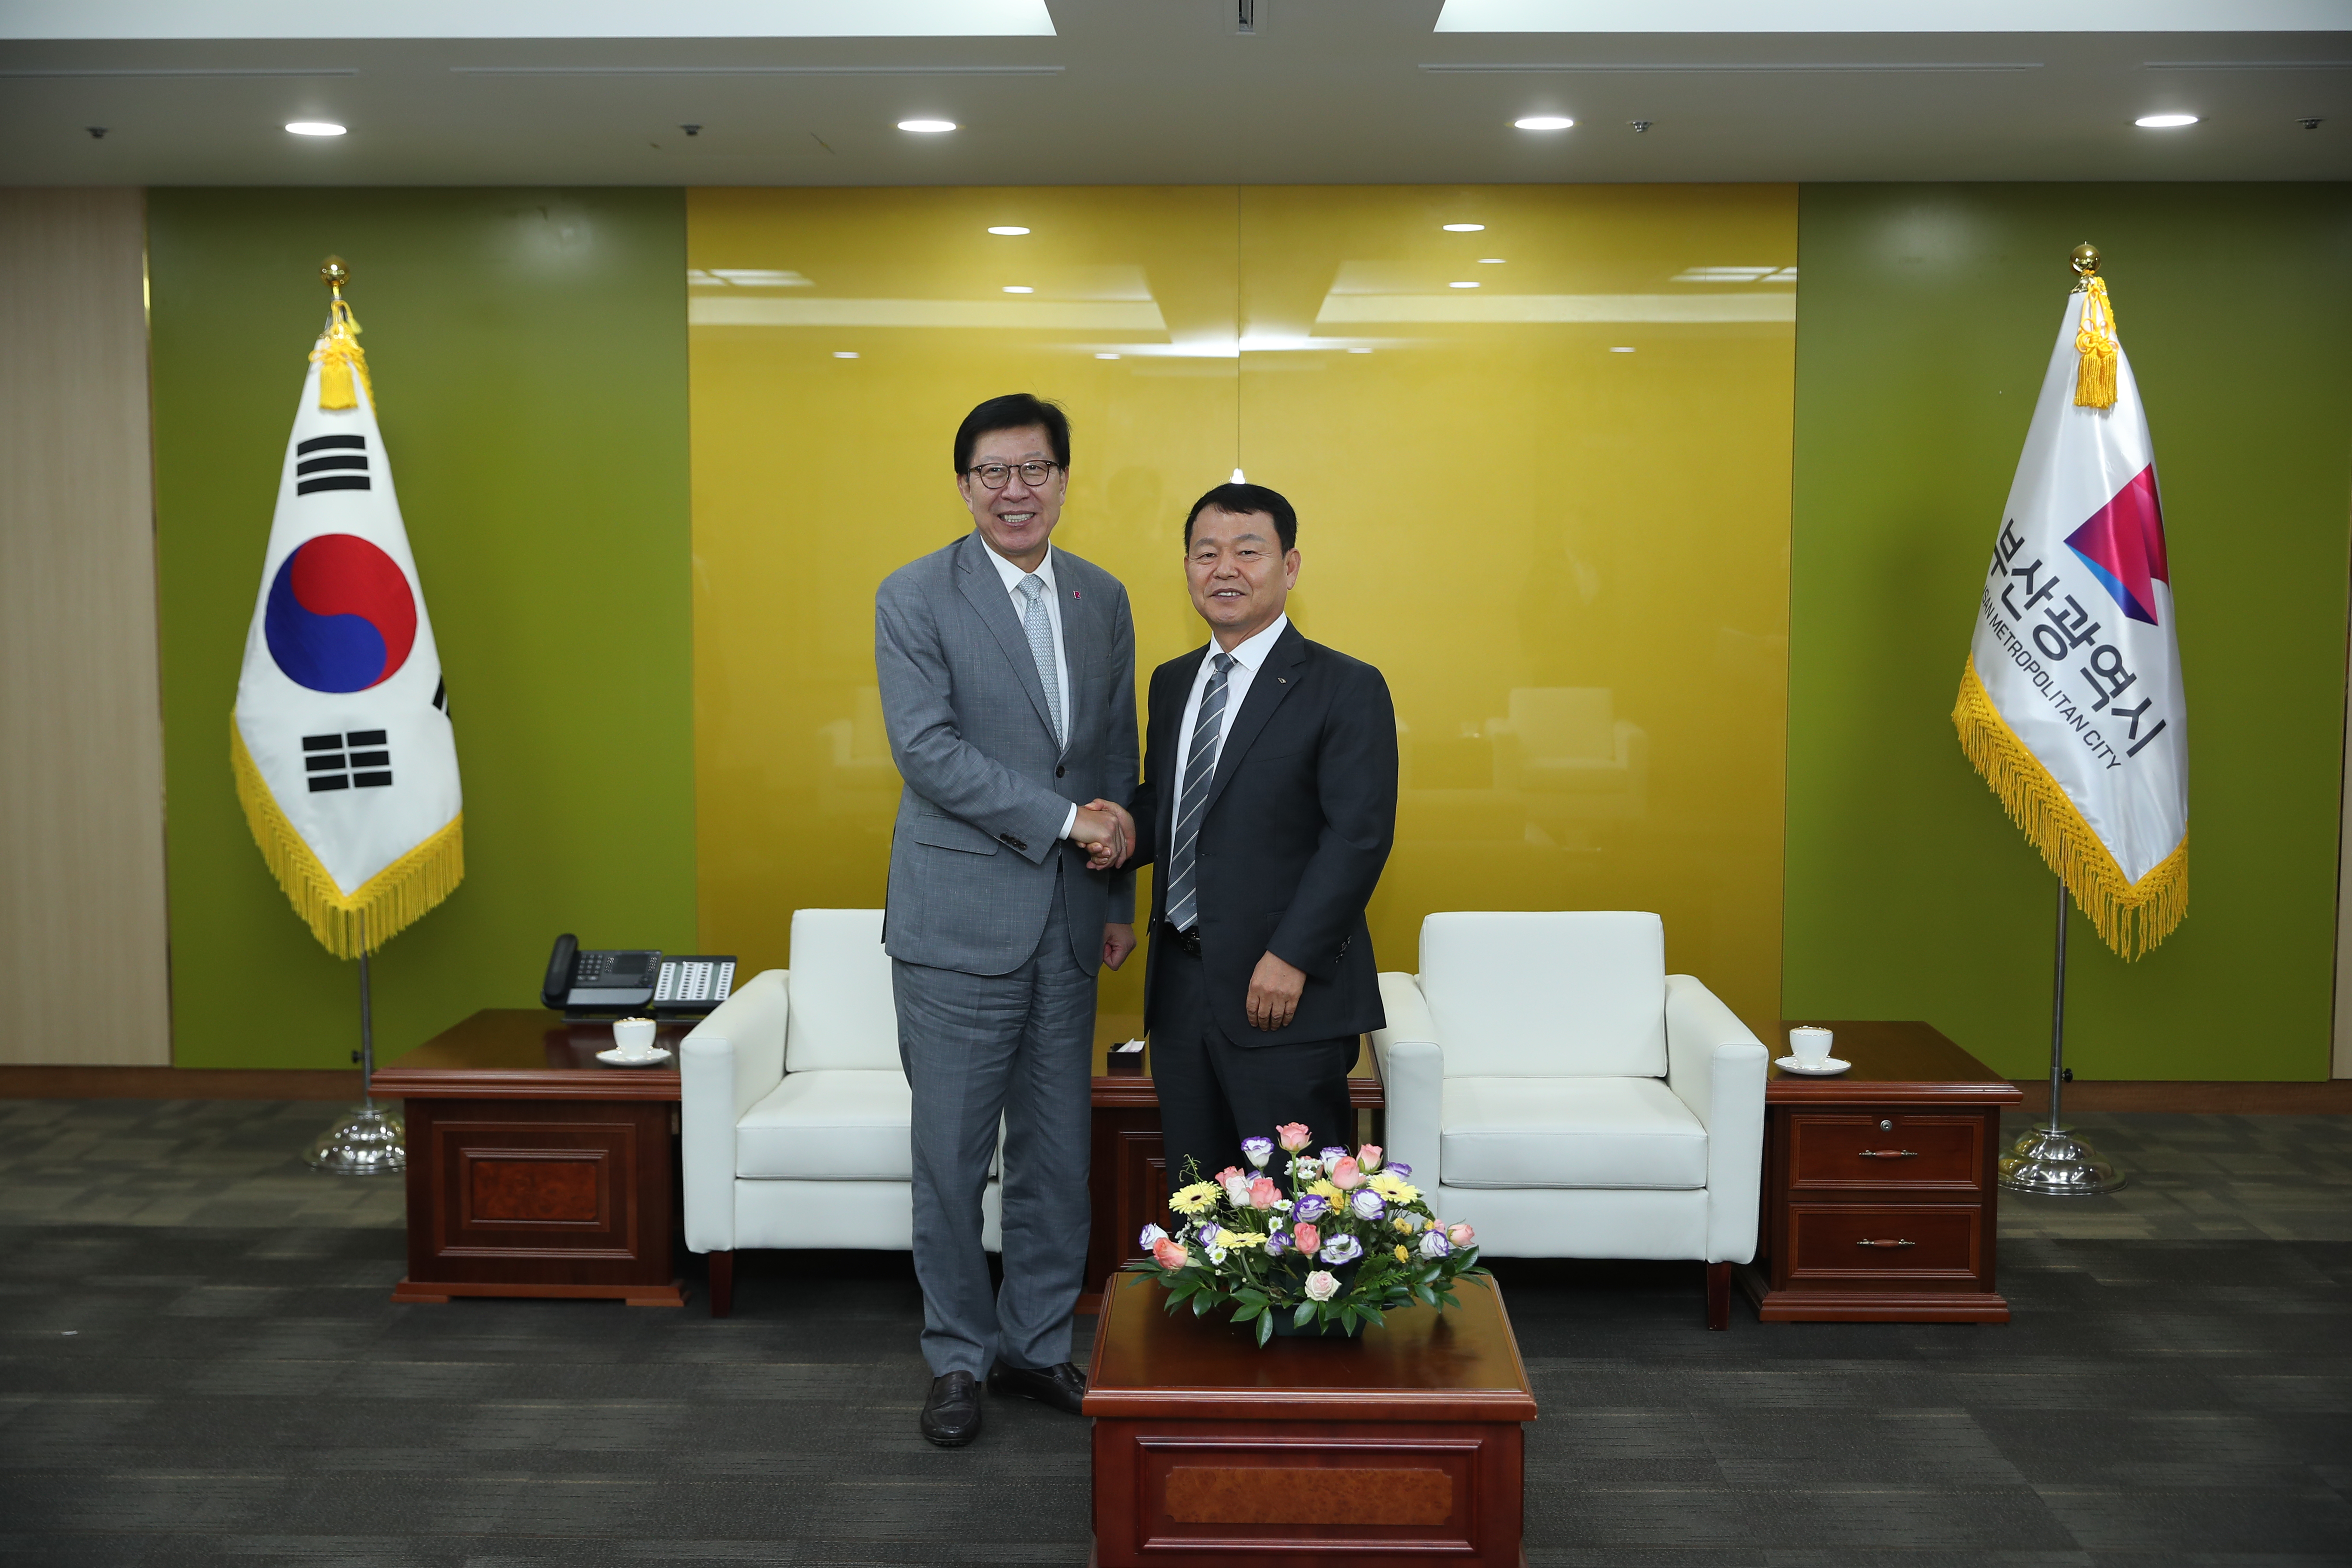 Meeting with the Mayor of Busan